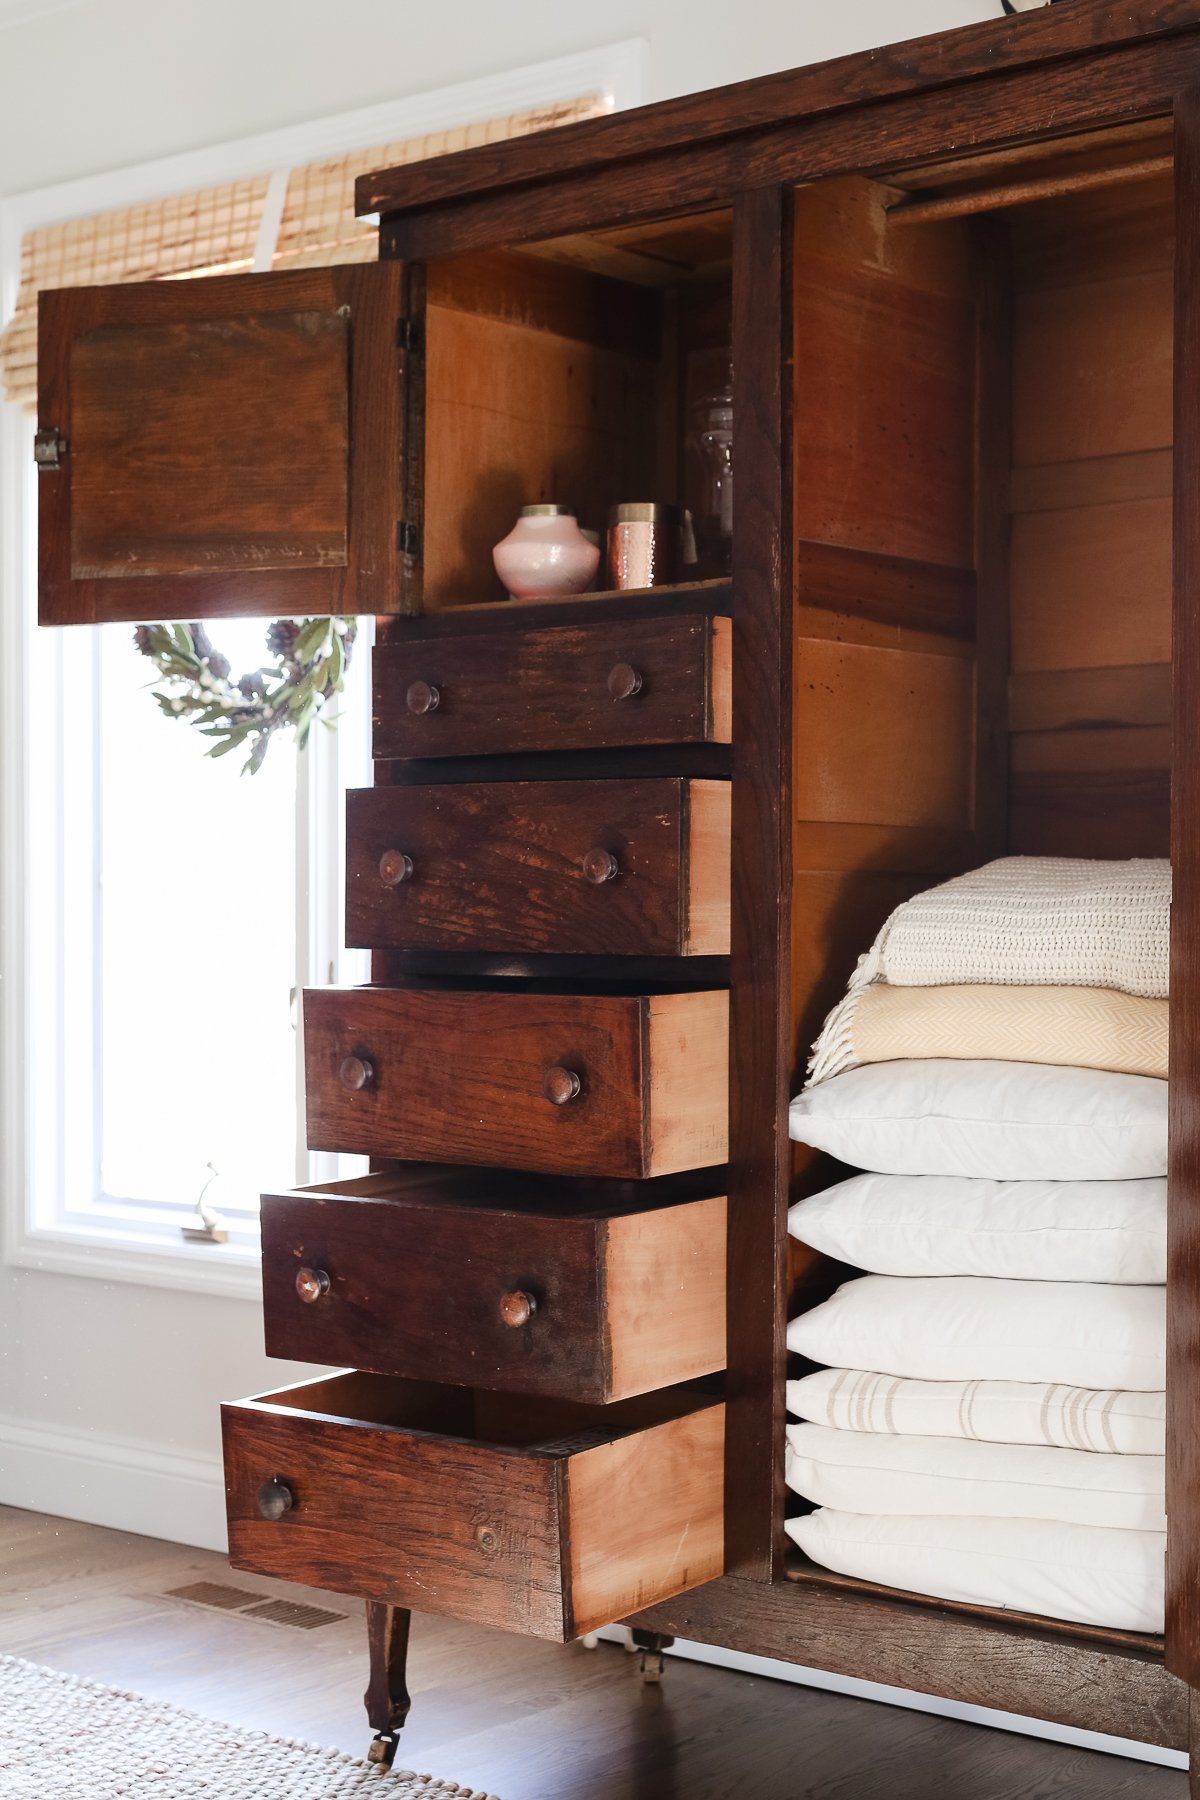 A dark wood linen cabinet in a family room space, with the drawers opened to reveal the interior storage.